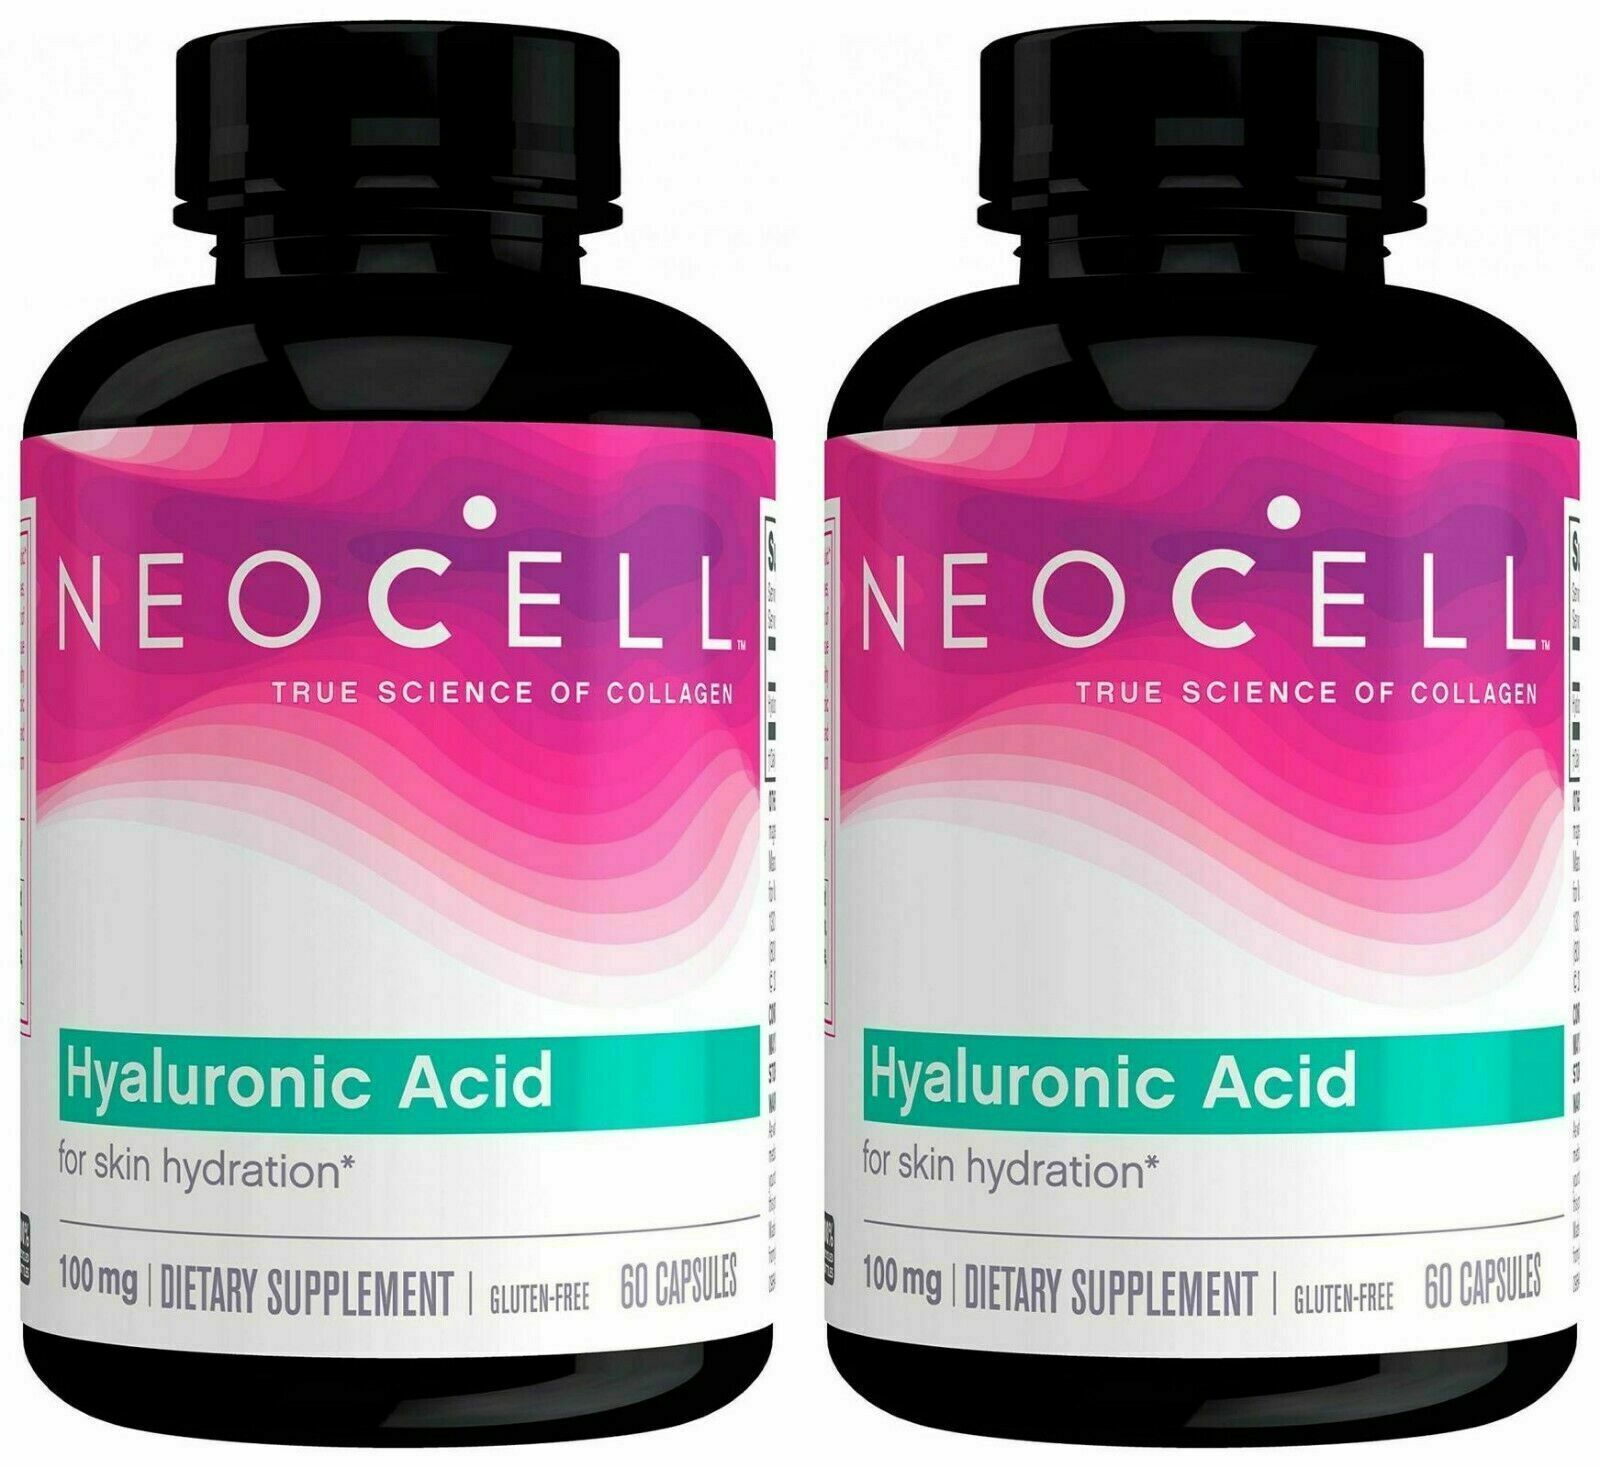 Lot of 2 (60 +60 caps) 100mg,  Neocell Hyaluronic Acid,   2 Pack  